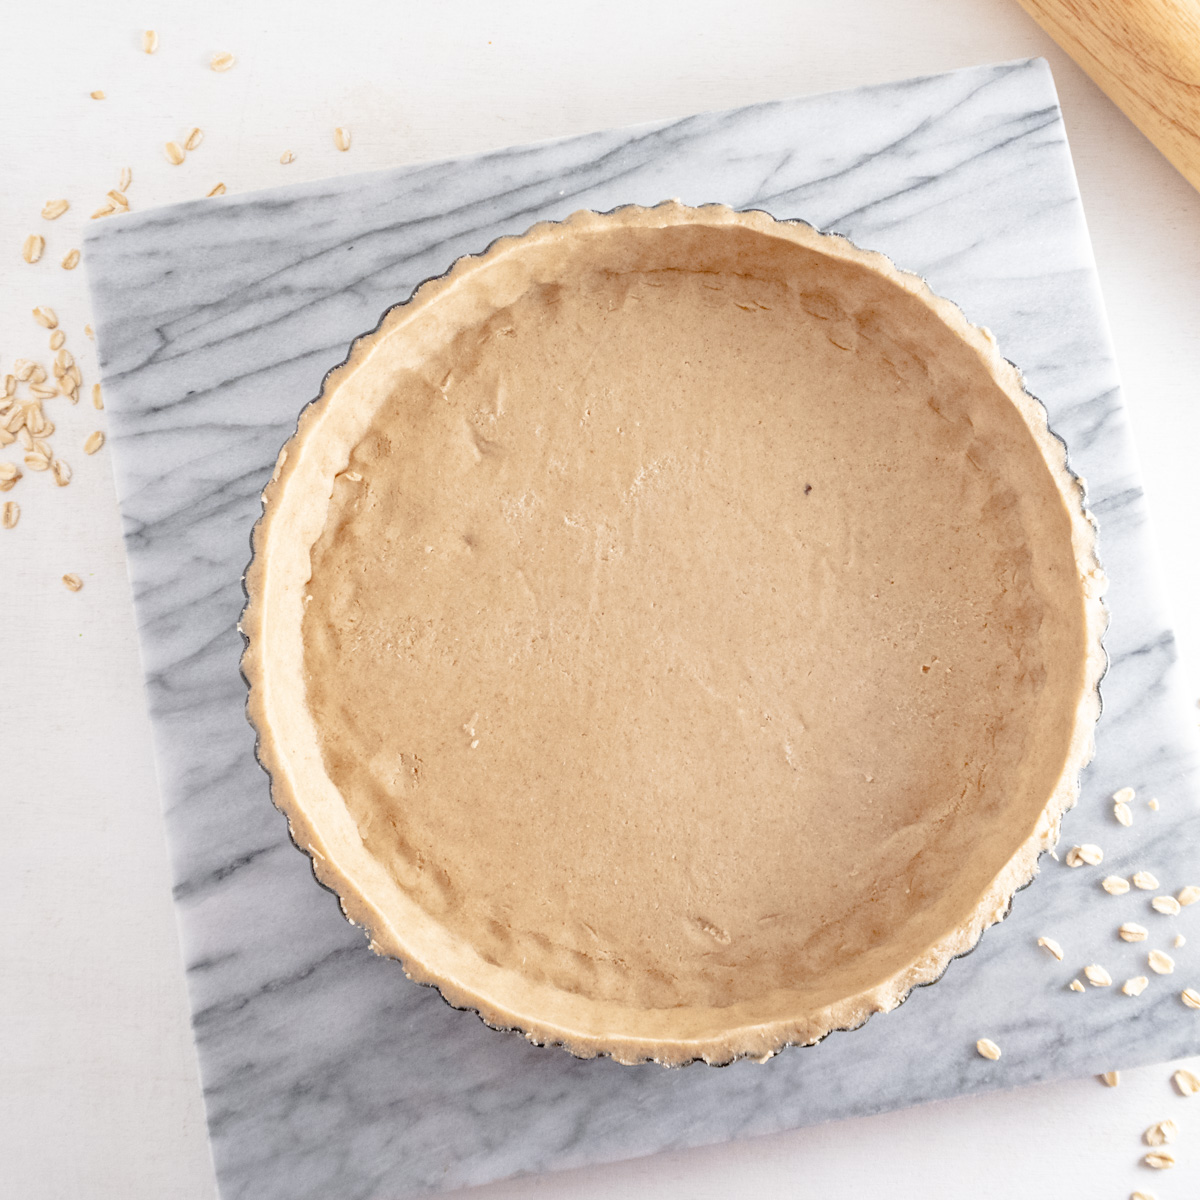 Raw gluten-free tart shell in a fluted tart tin on a slab of marble and oats around it.